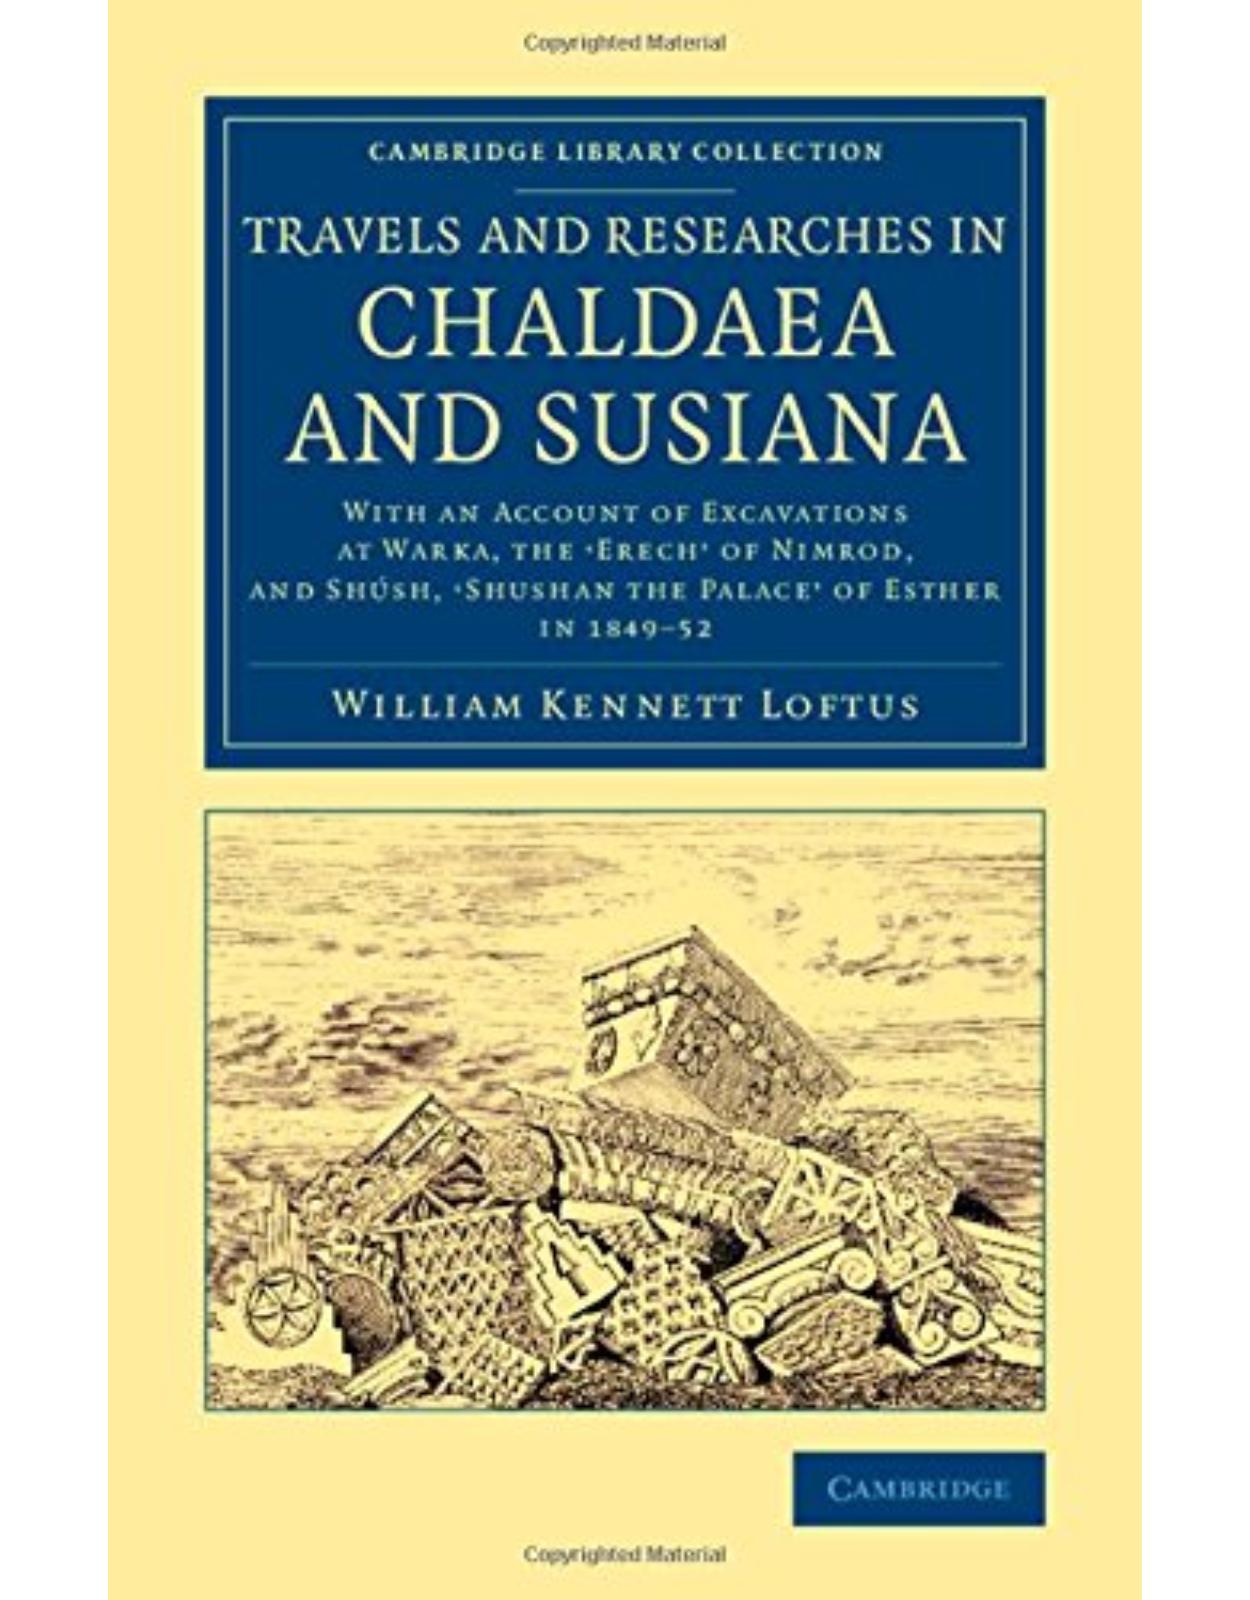 Travels and Researches in Chaldaea and Susiana: With an Account of Excavations at Warka, the 'Erech' of Nimrod, and Shúsh, 'Shushan the Palace' of ... (Cambridge Library Collection - Archaeology)